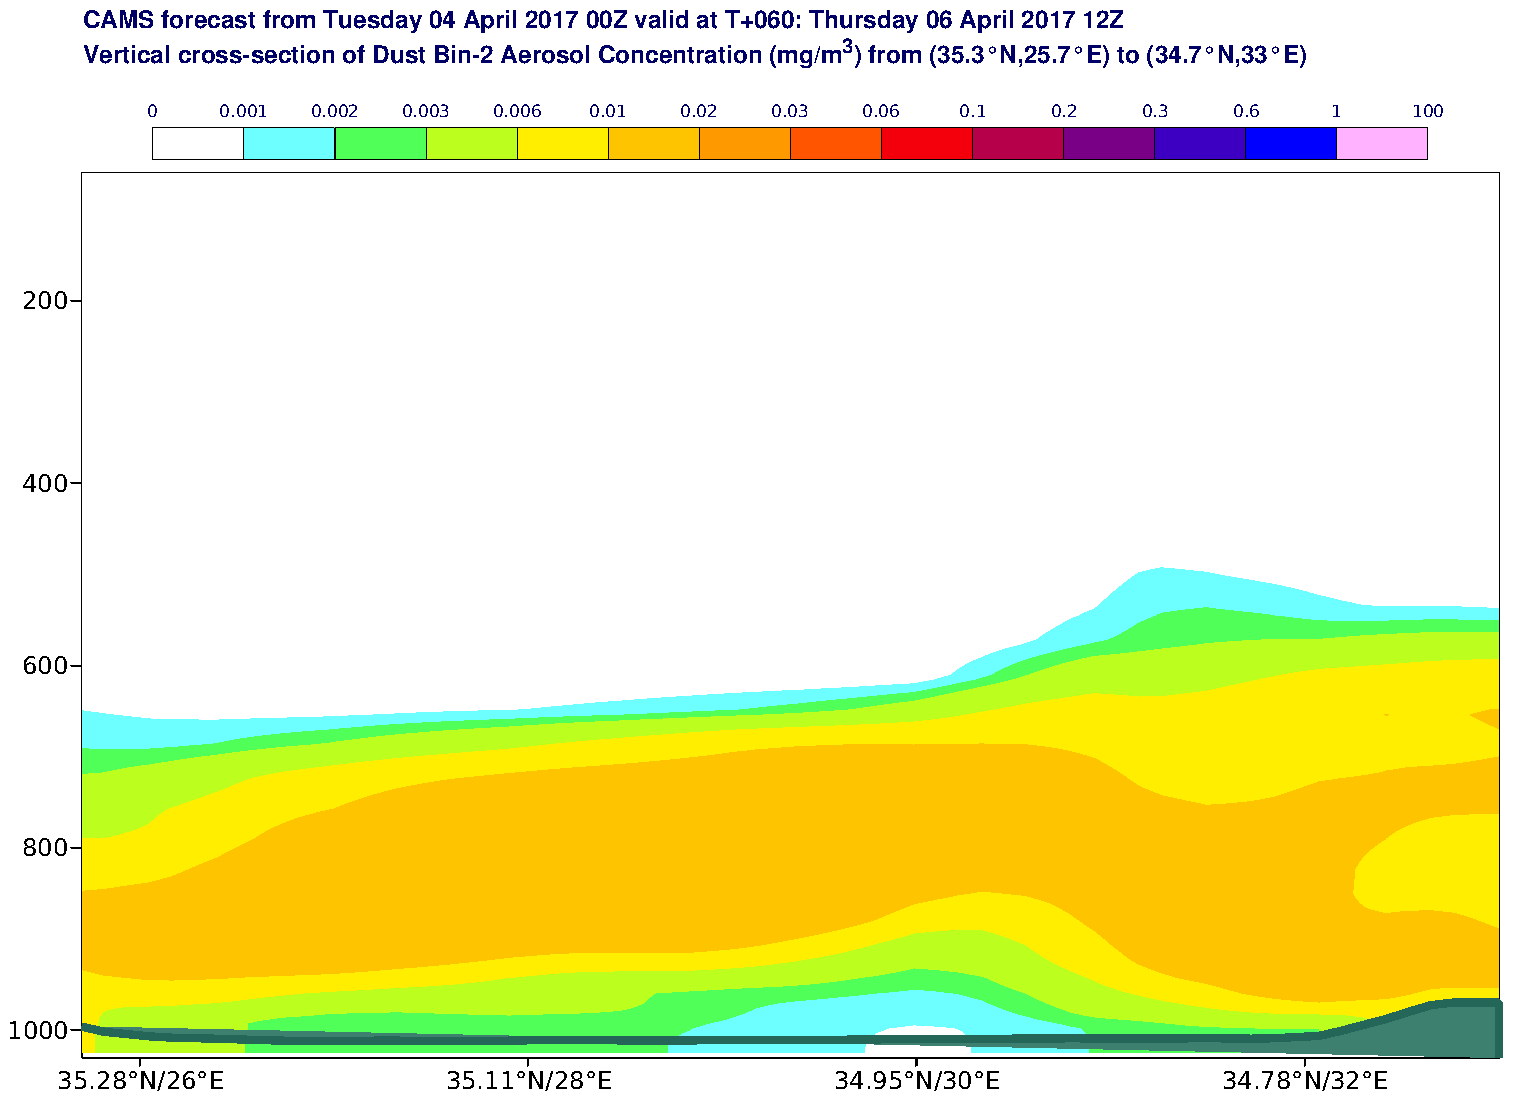 Vertical cross-section of Dust Bin-2 Aerosol Concentration (mg/m3) valid at T60 - 2017-04-06 12:00